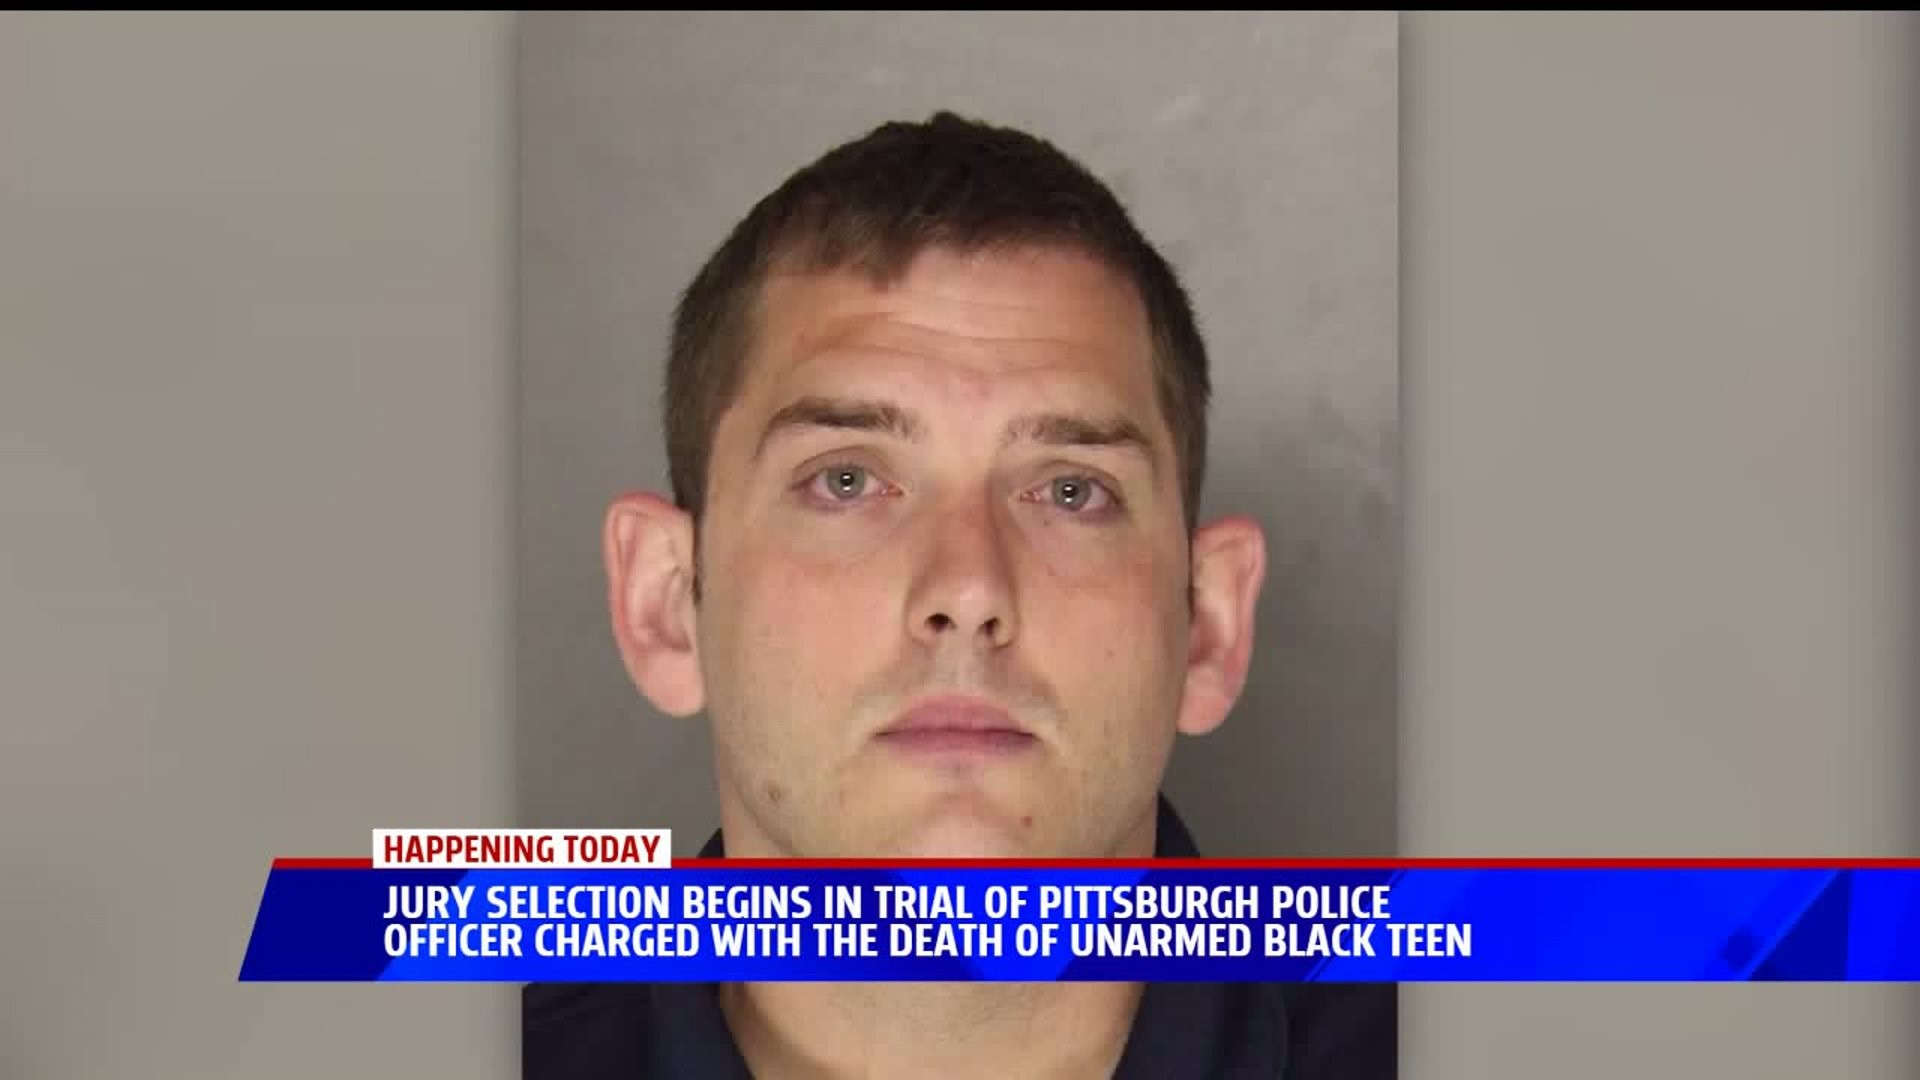 Jury Selection Begins for Trial of Pittsburg Police Officer